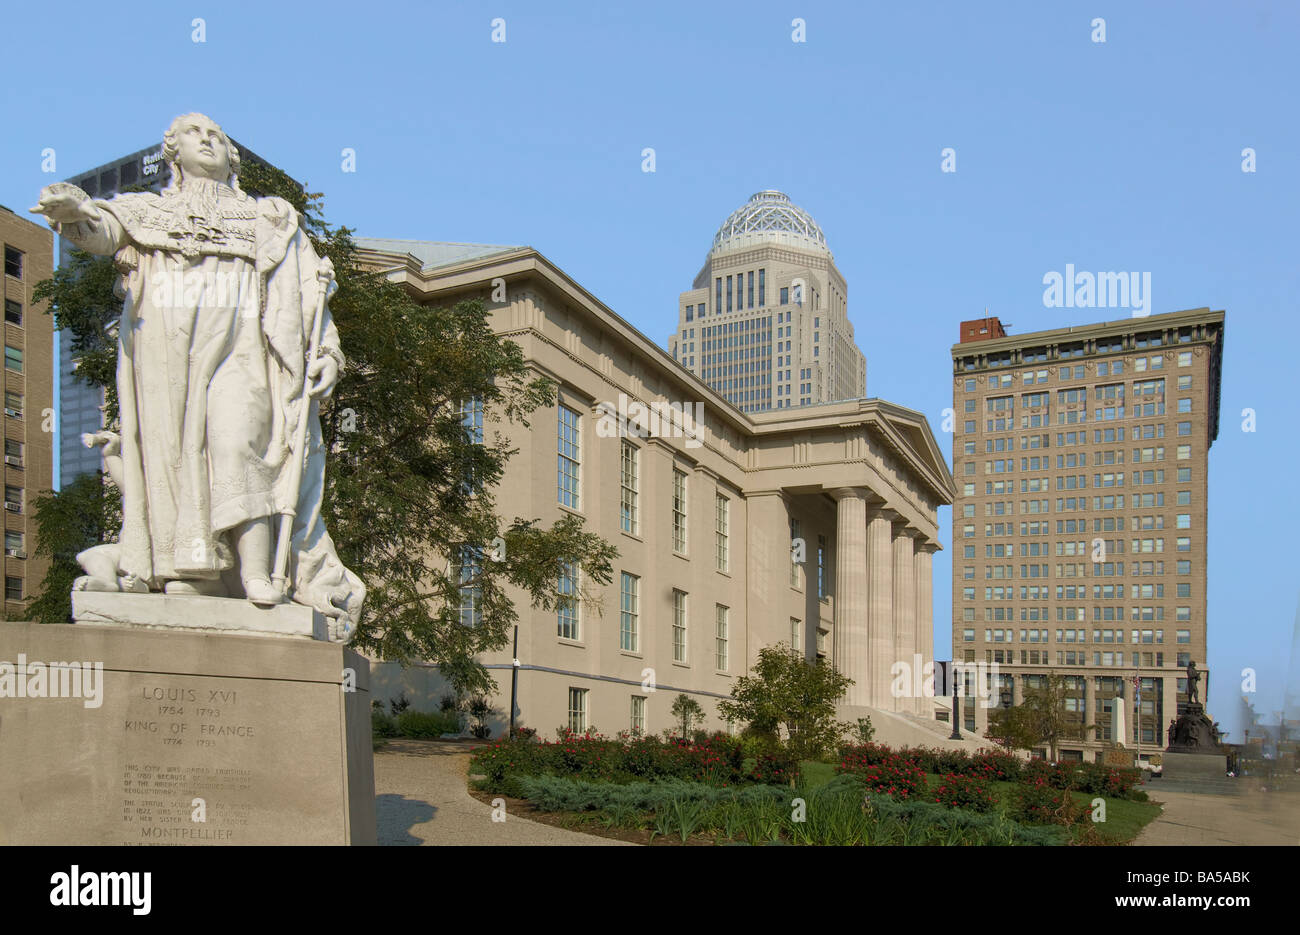 Statue of King Louis XVI in front of Jefferson County Courthouse in Stock Photo - Alamy